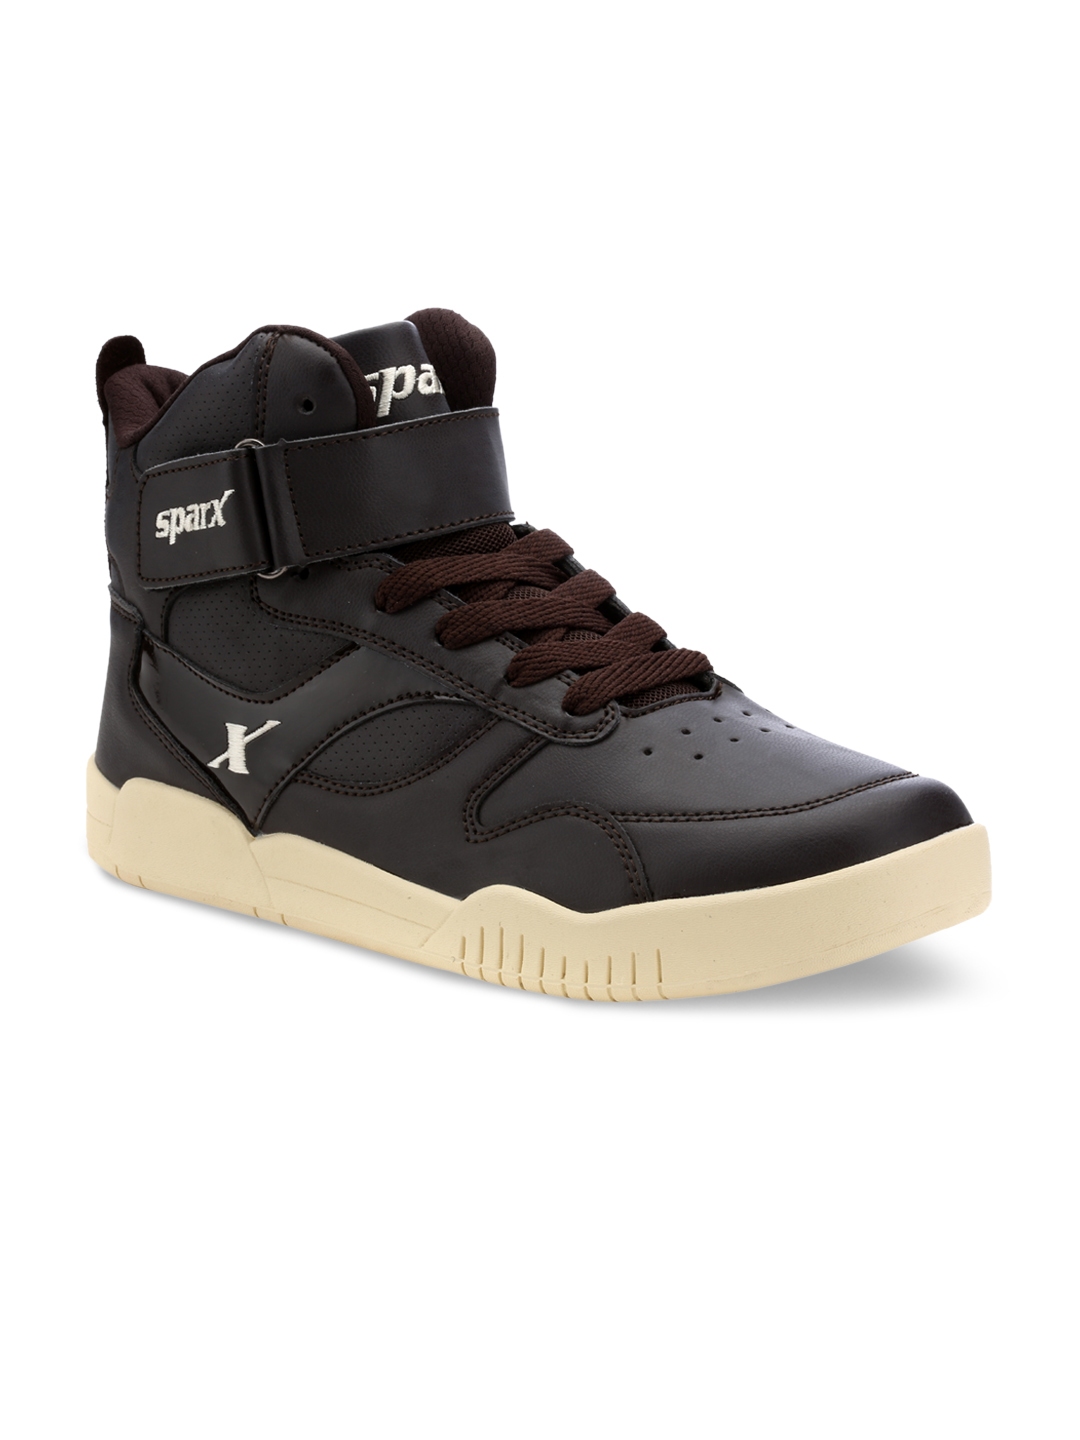 Brown Textured Synthetic Leather Mid 